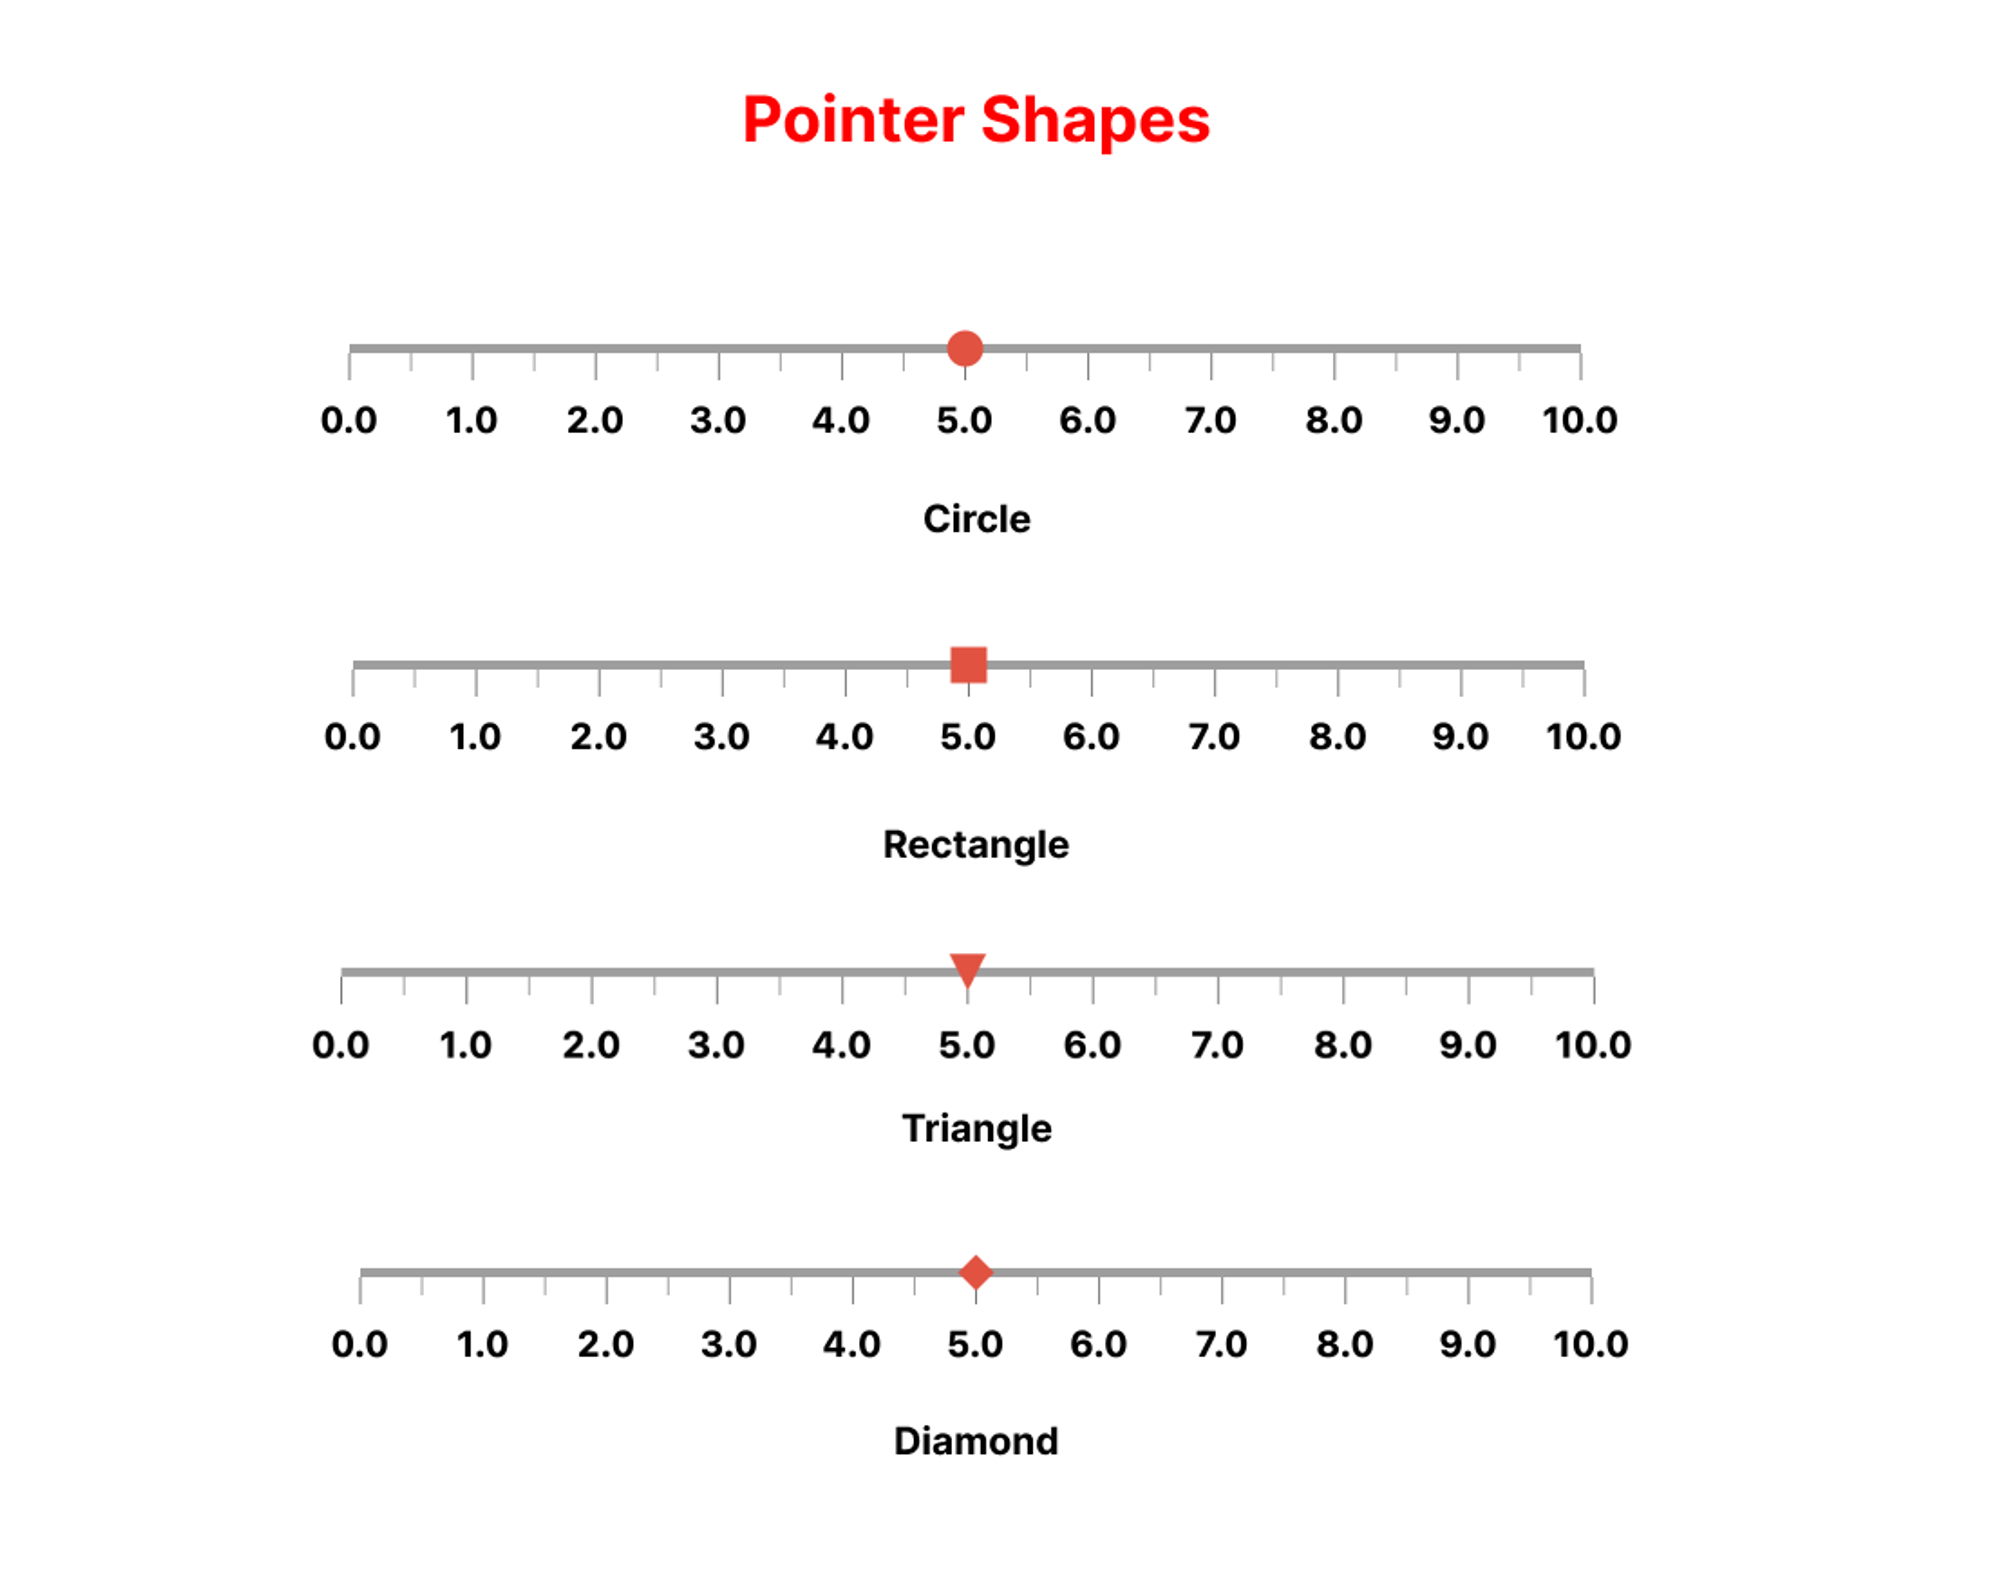 Pointer shapes